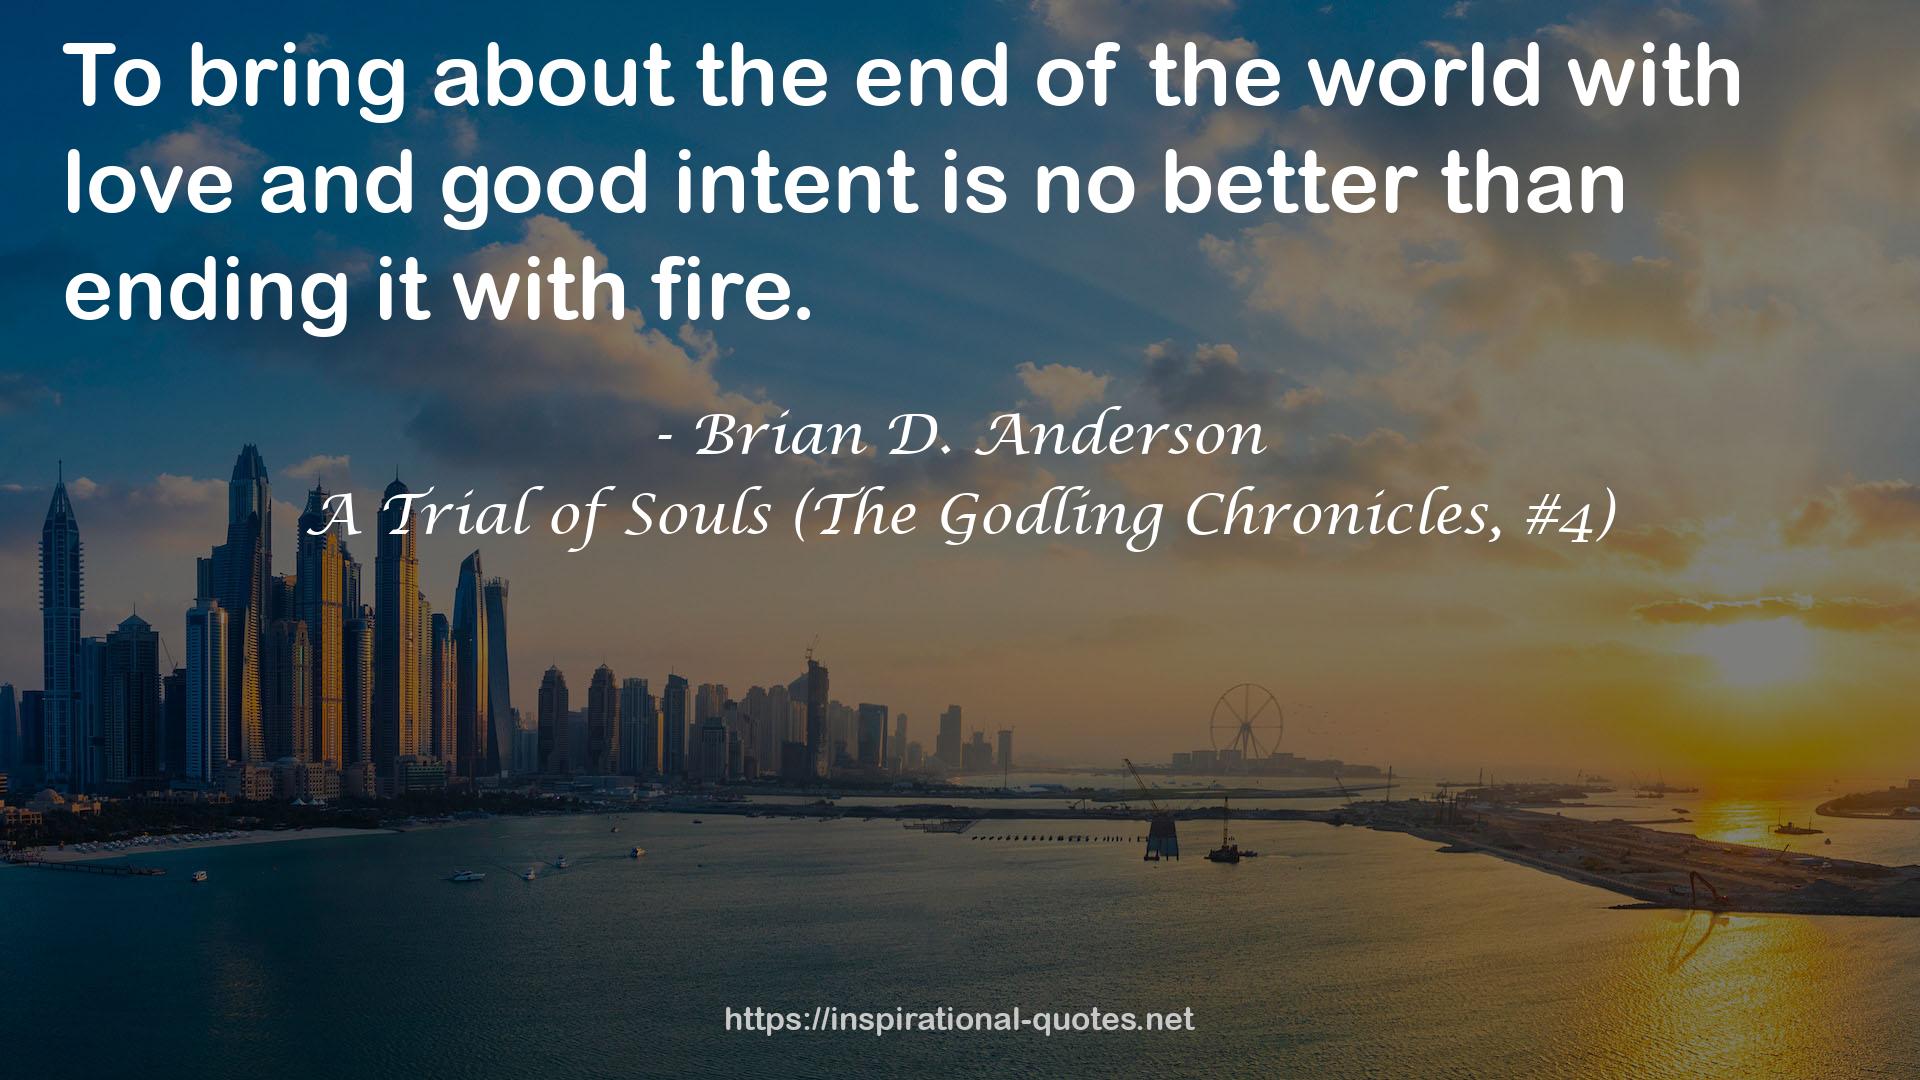 A Trial of Souls (The Godling Chronicles, #4) QUOTES